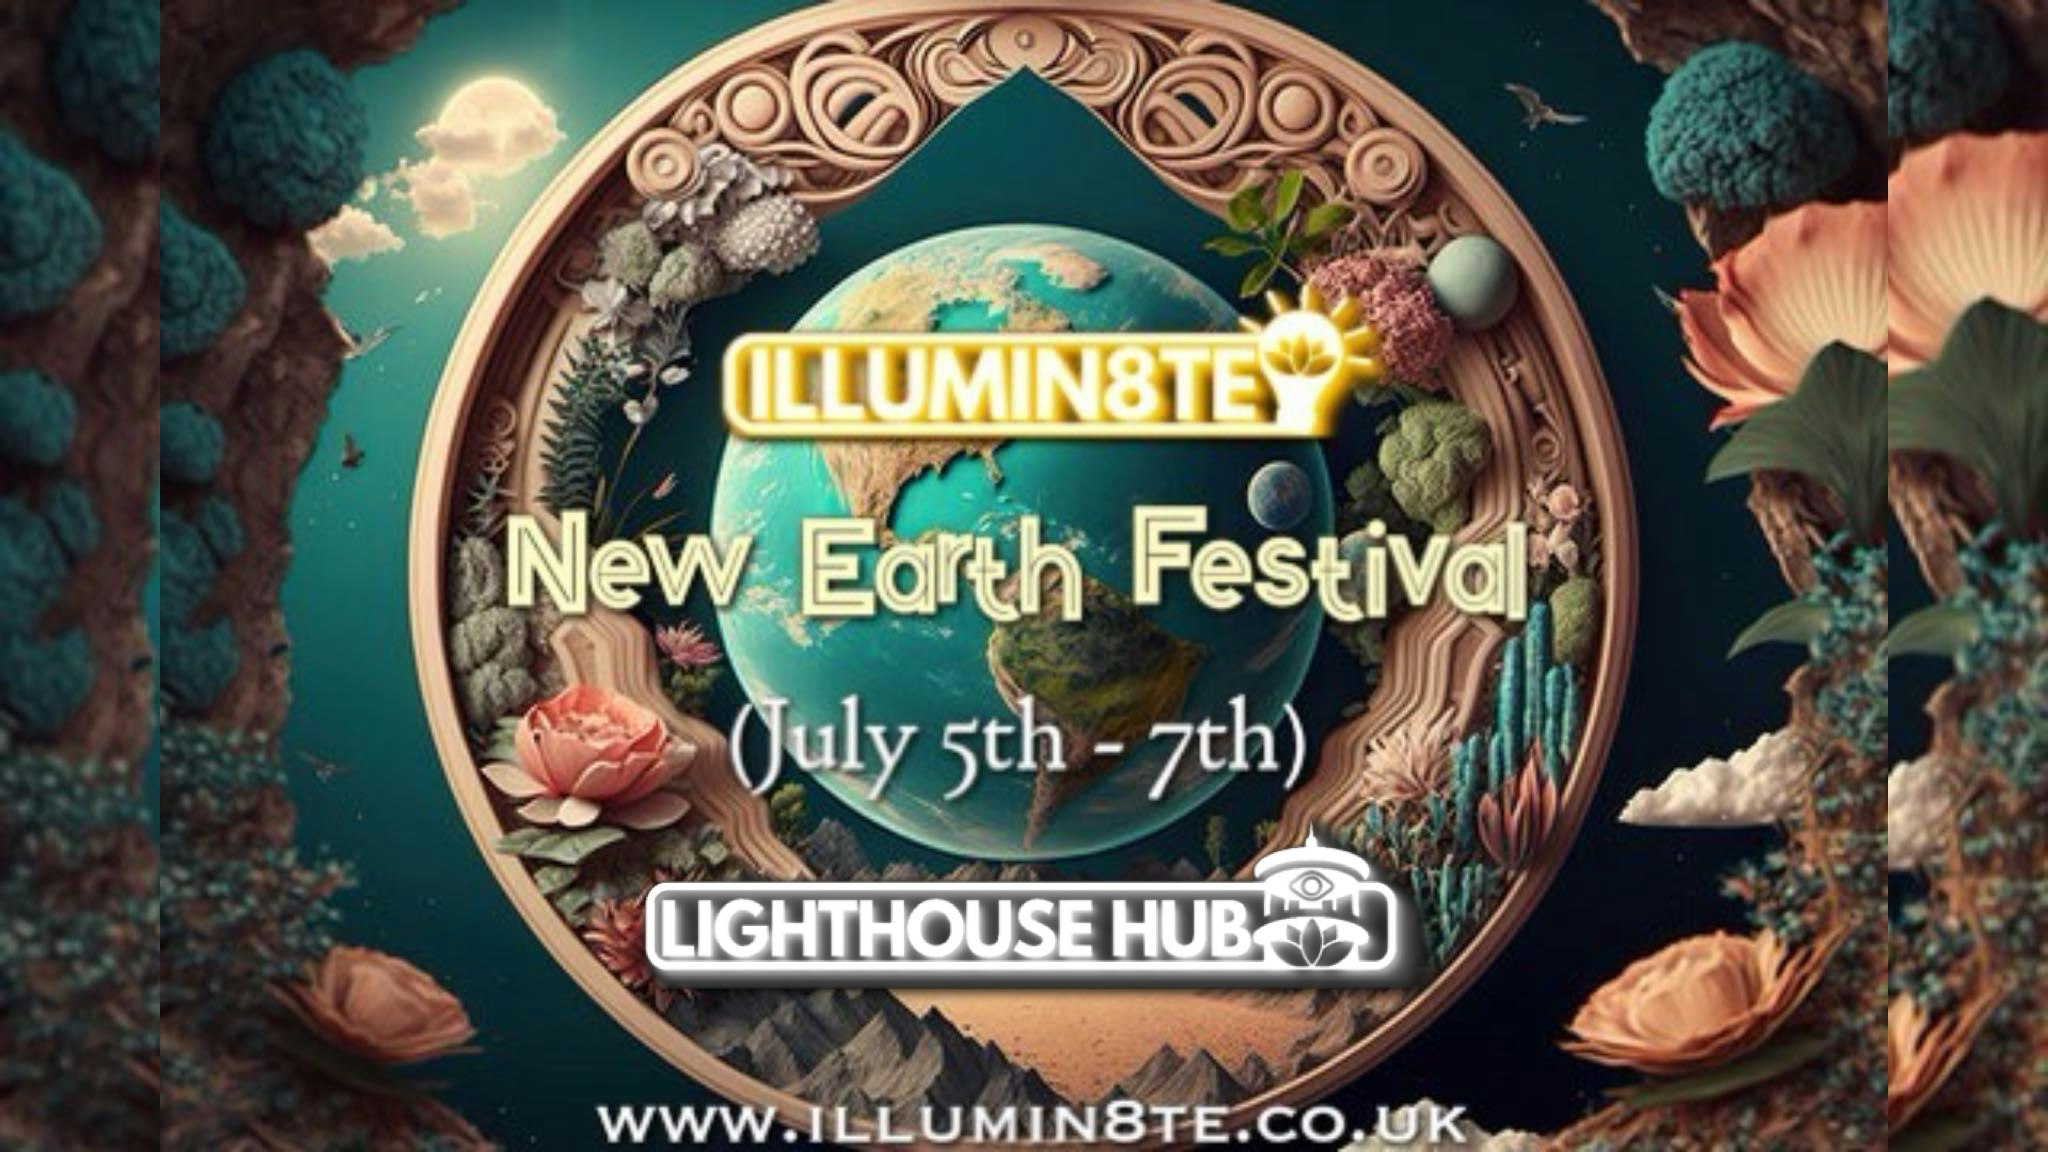 Illumin8te | Earth New Festival Weekend (Friday 5th July – Sunday 7th July) @ THE LIGHTHOUSE HUB